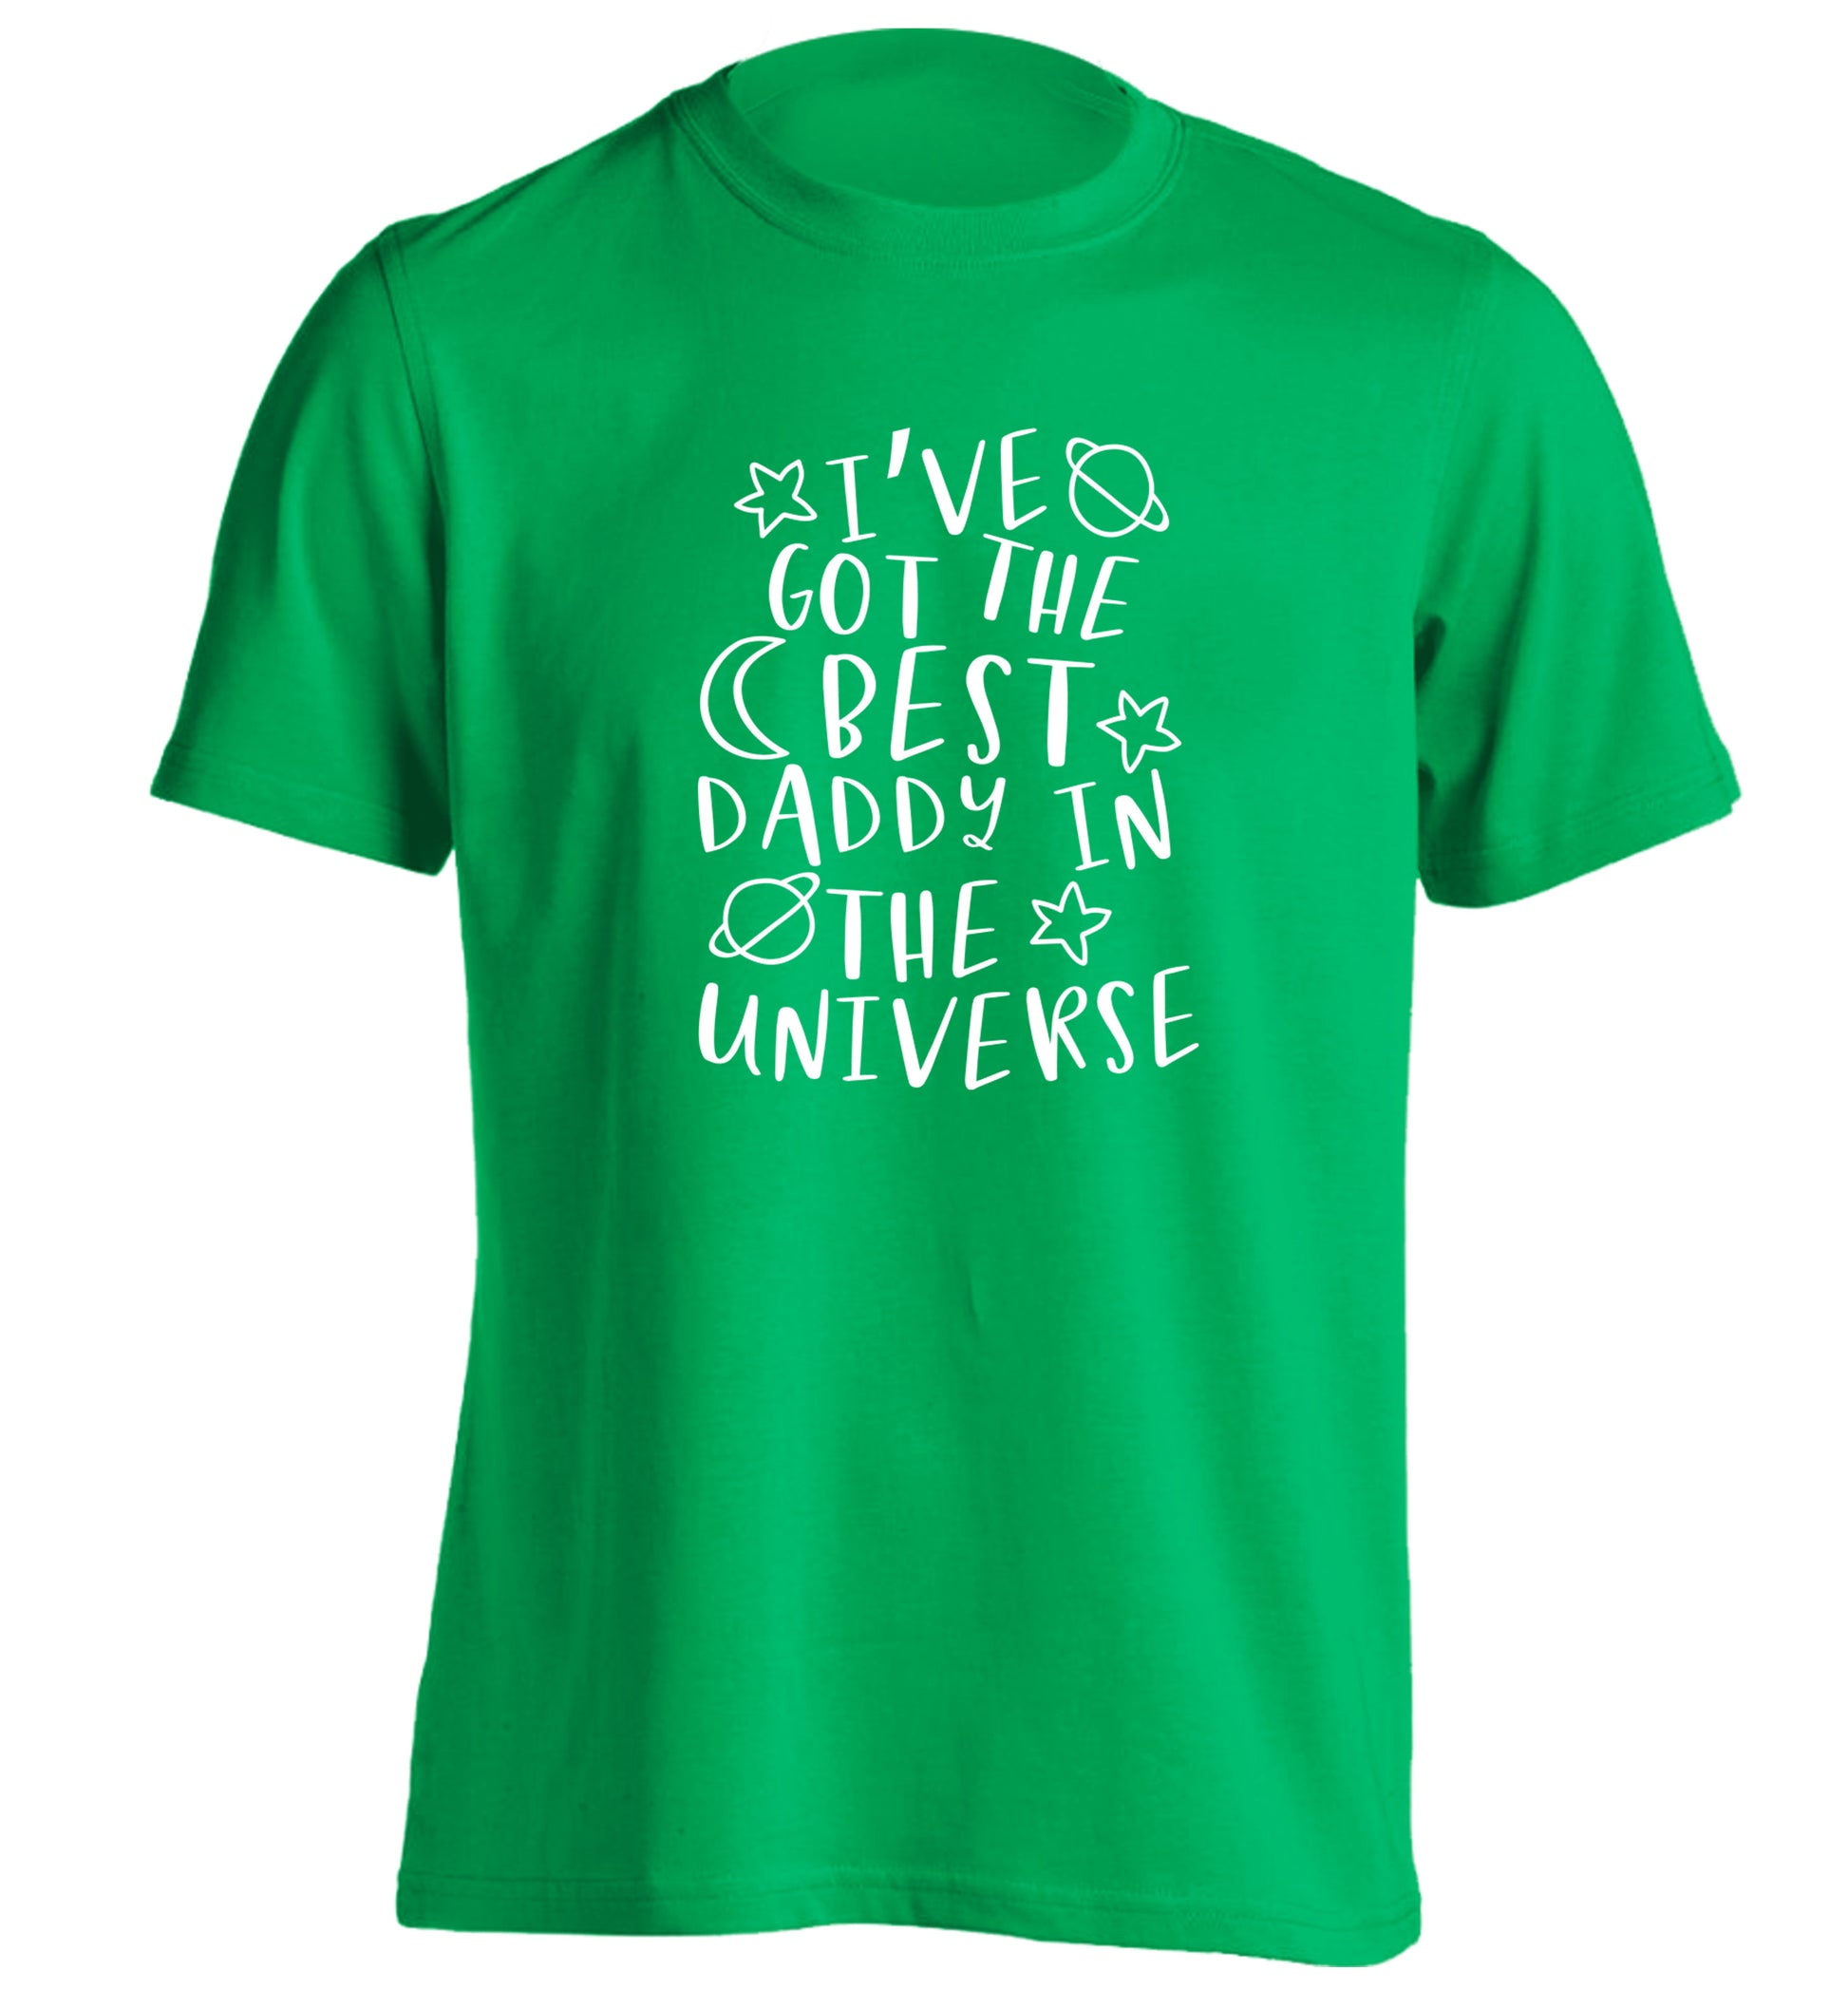 I've got the best daddy in the universe adults unisex green Tshirt 2XL